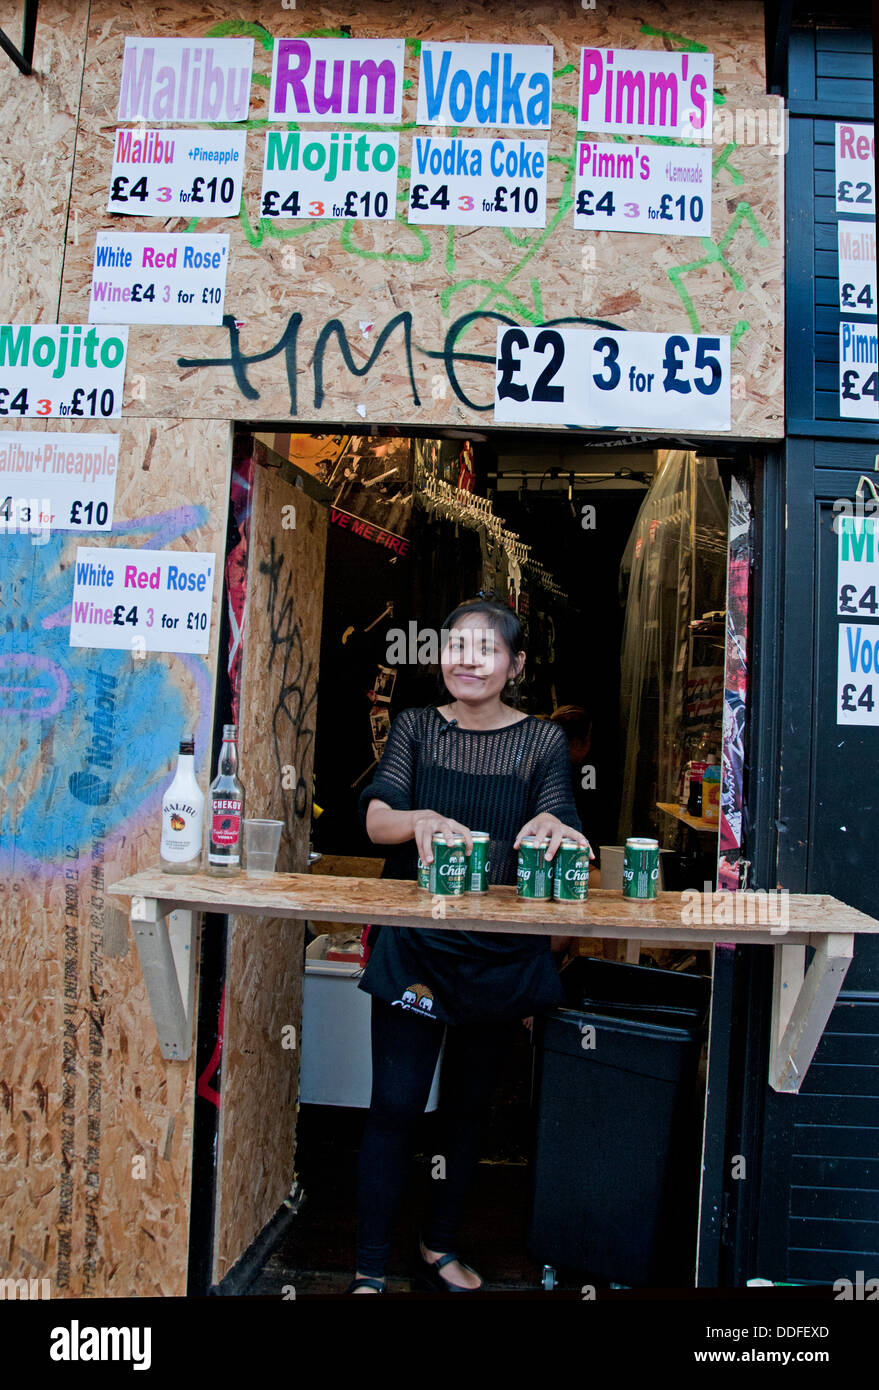 Pop up shop selling drinks and alcohol during notting Hill Festival Stock Photo